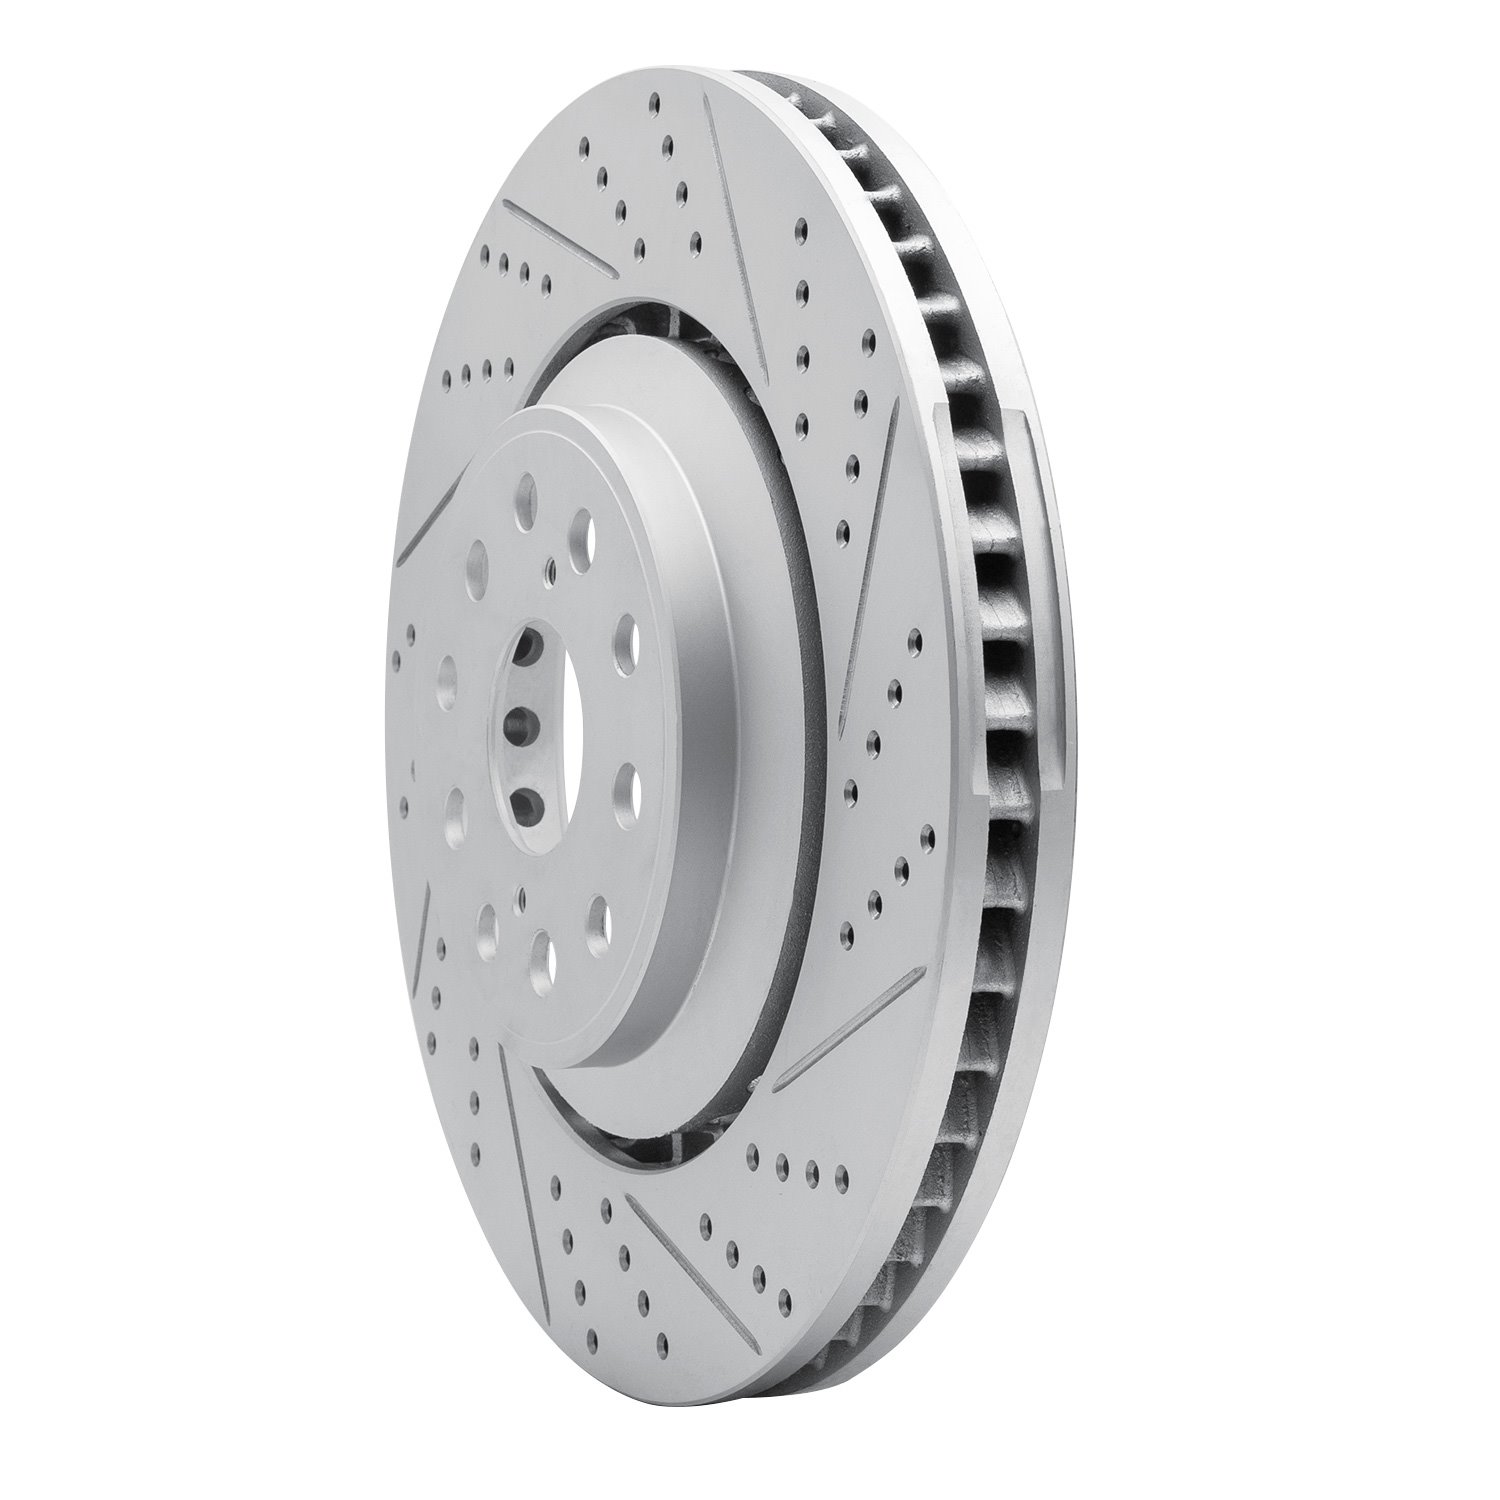 830-75020D Geoperformance Drilled/Slotted Brake Rotor, Fits Select Lexus/Toyota/Scion, Position: Right Front